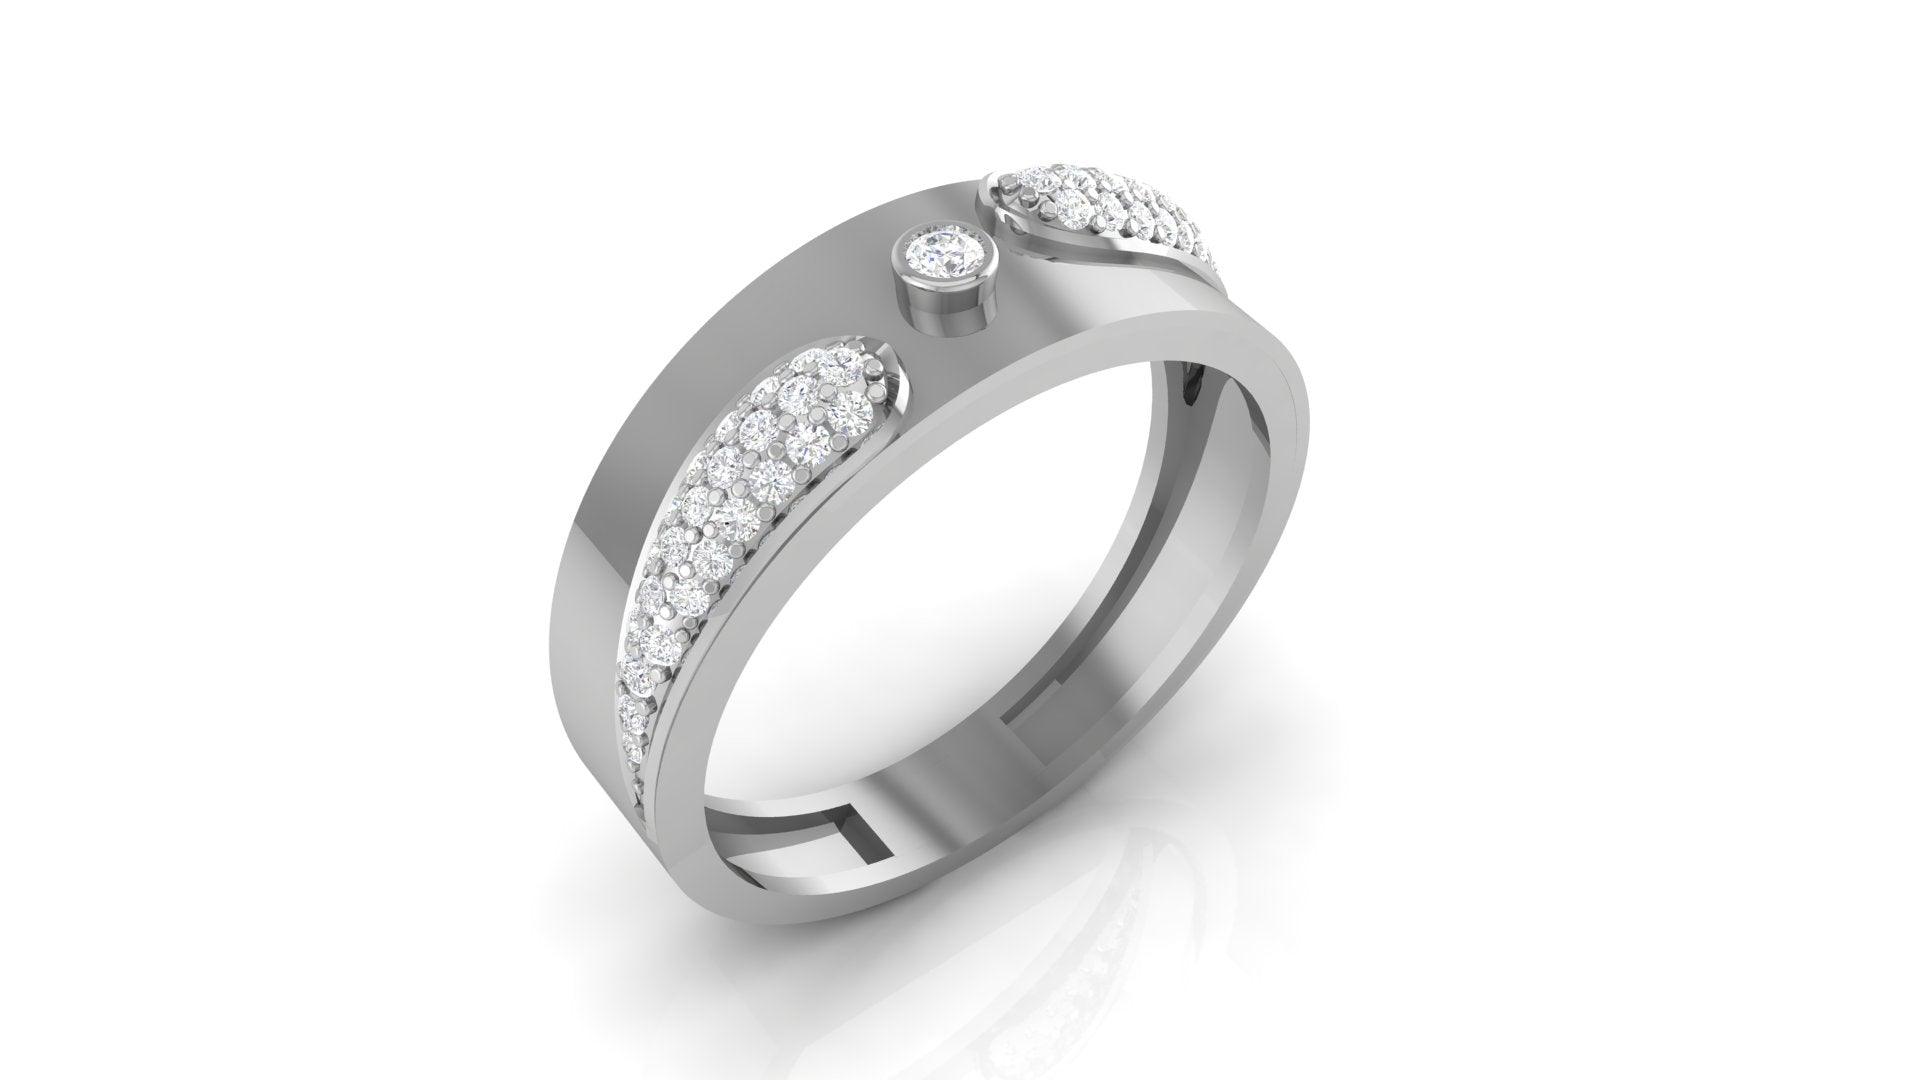 Buy Platinum Engagement Rings Designs Online in India | Candere by Kalyan  Jewellers